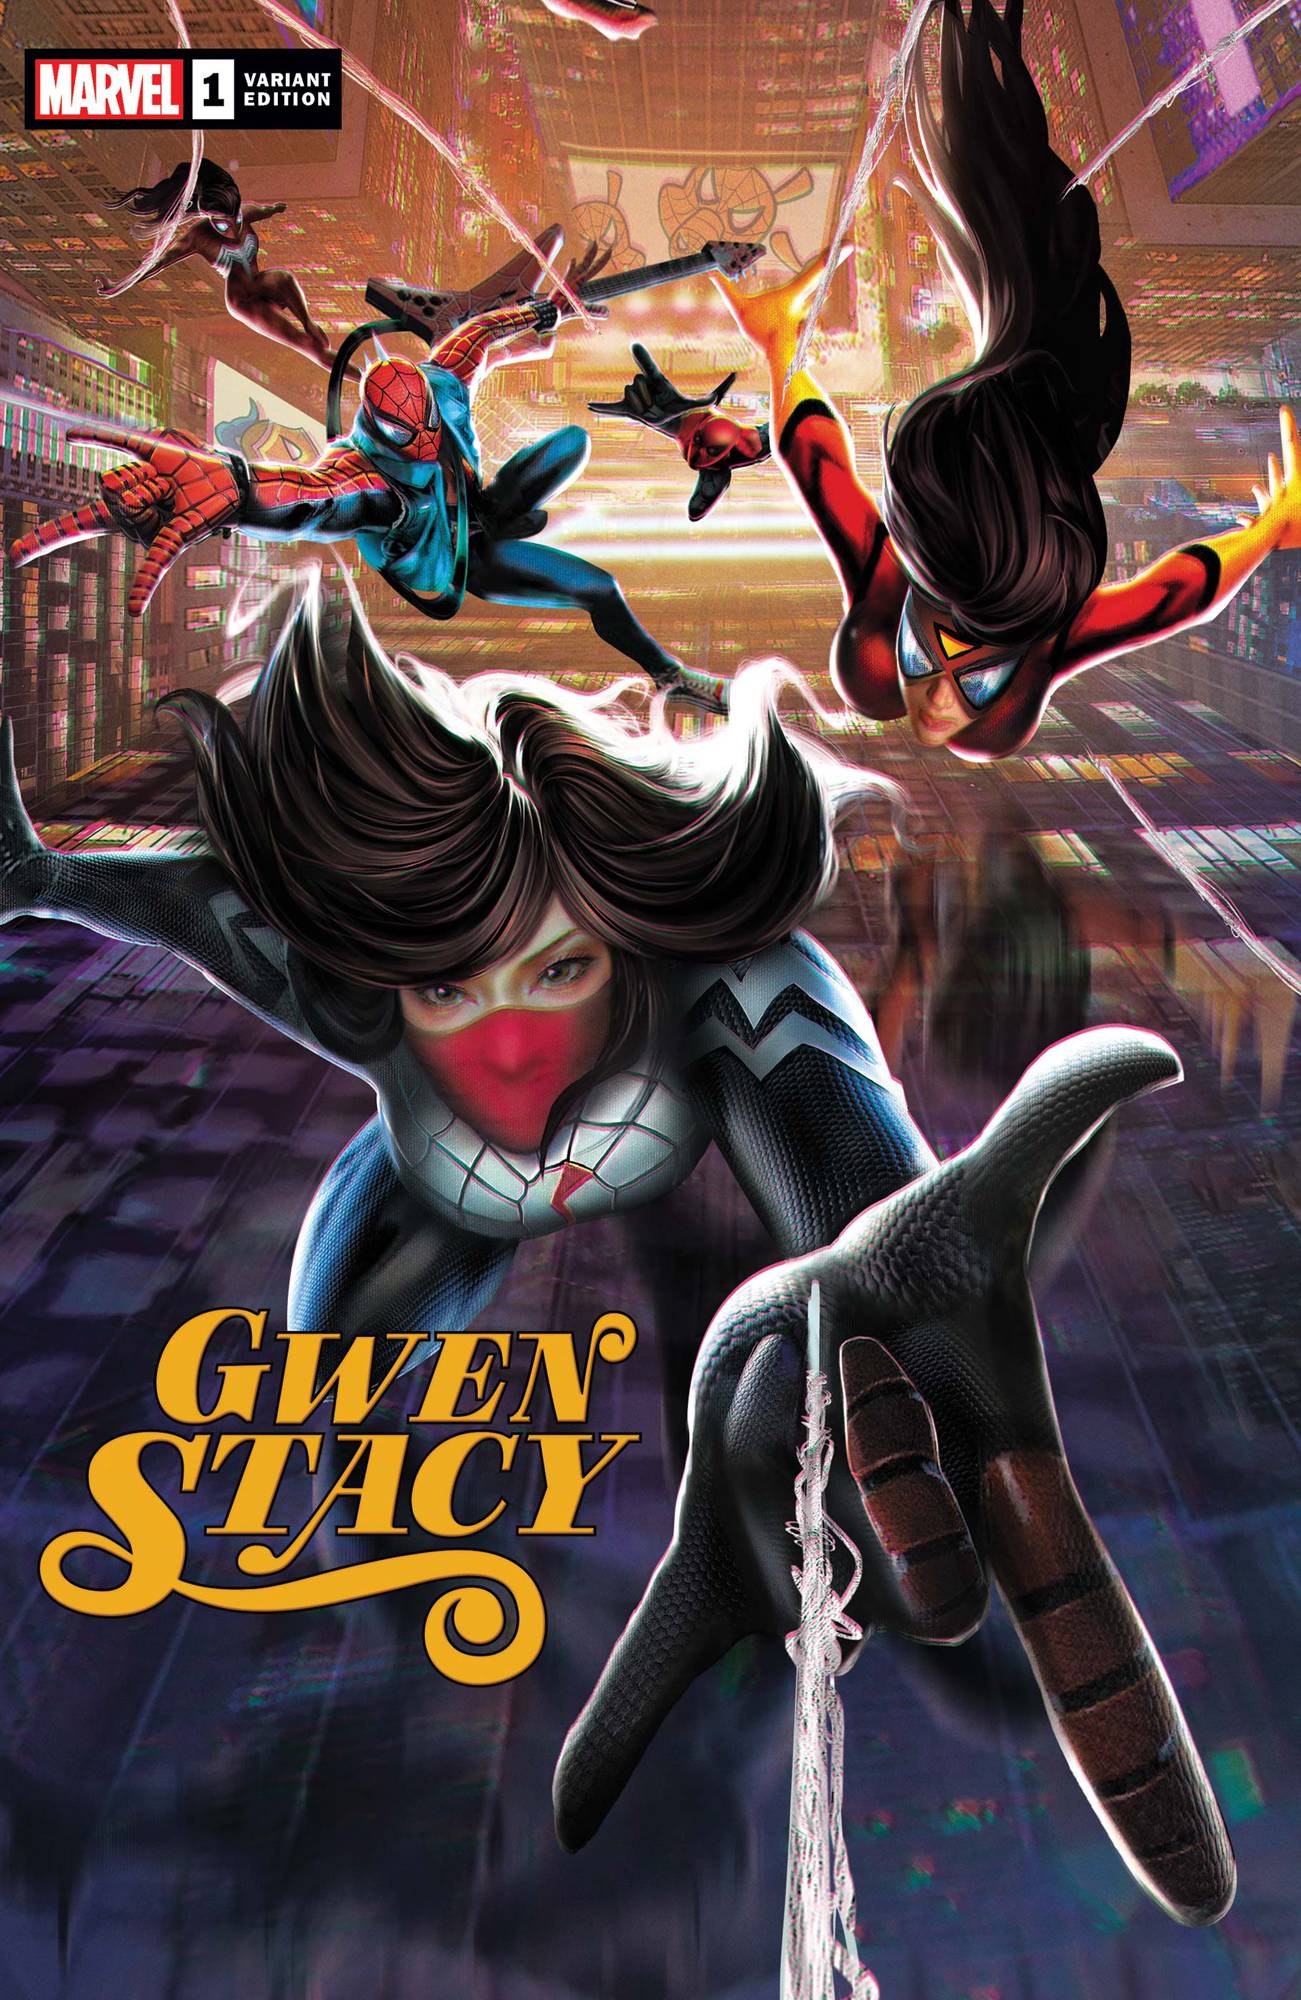 GWEN STACY #1 (OF 5) JIE YUAN CONNECTING CHINESE NEW YEAR VA